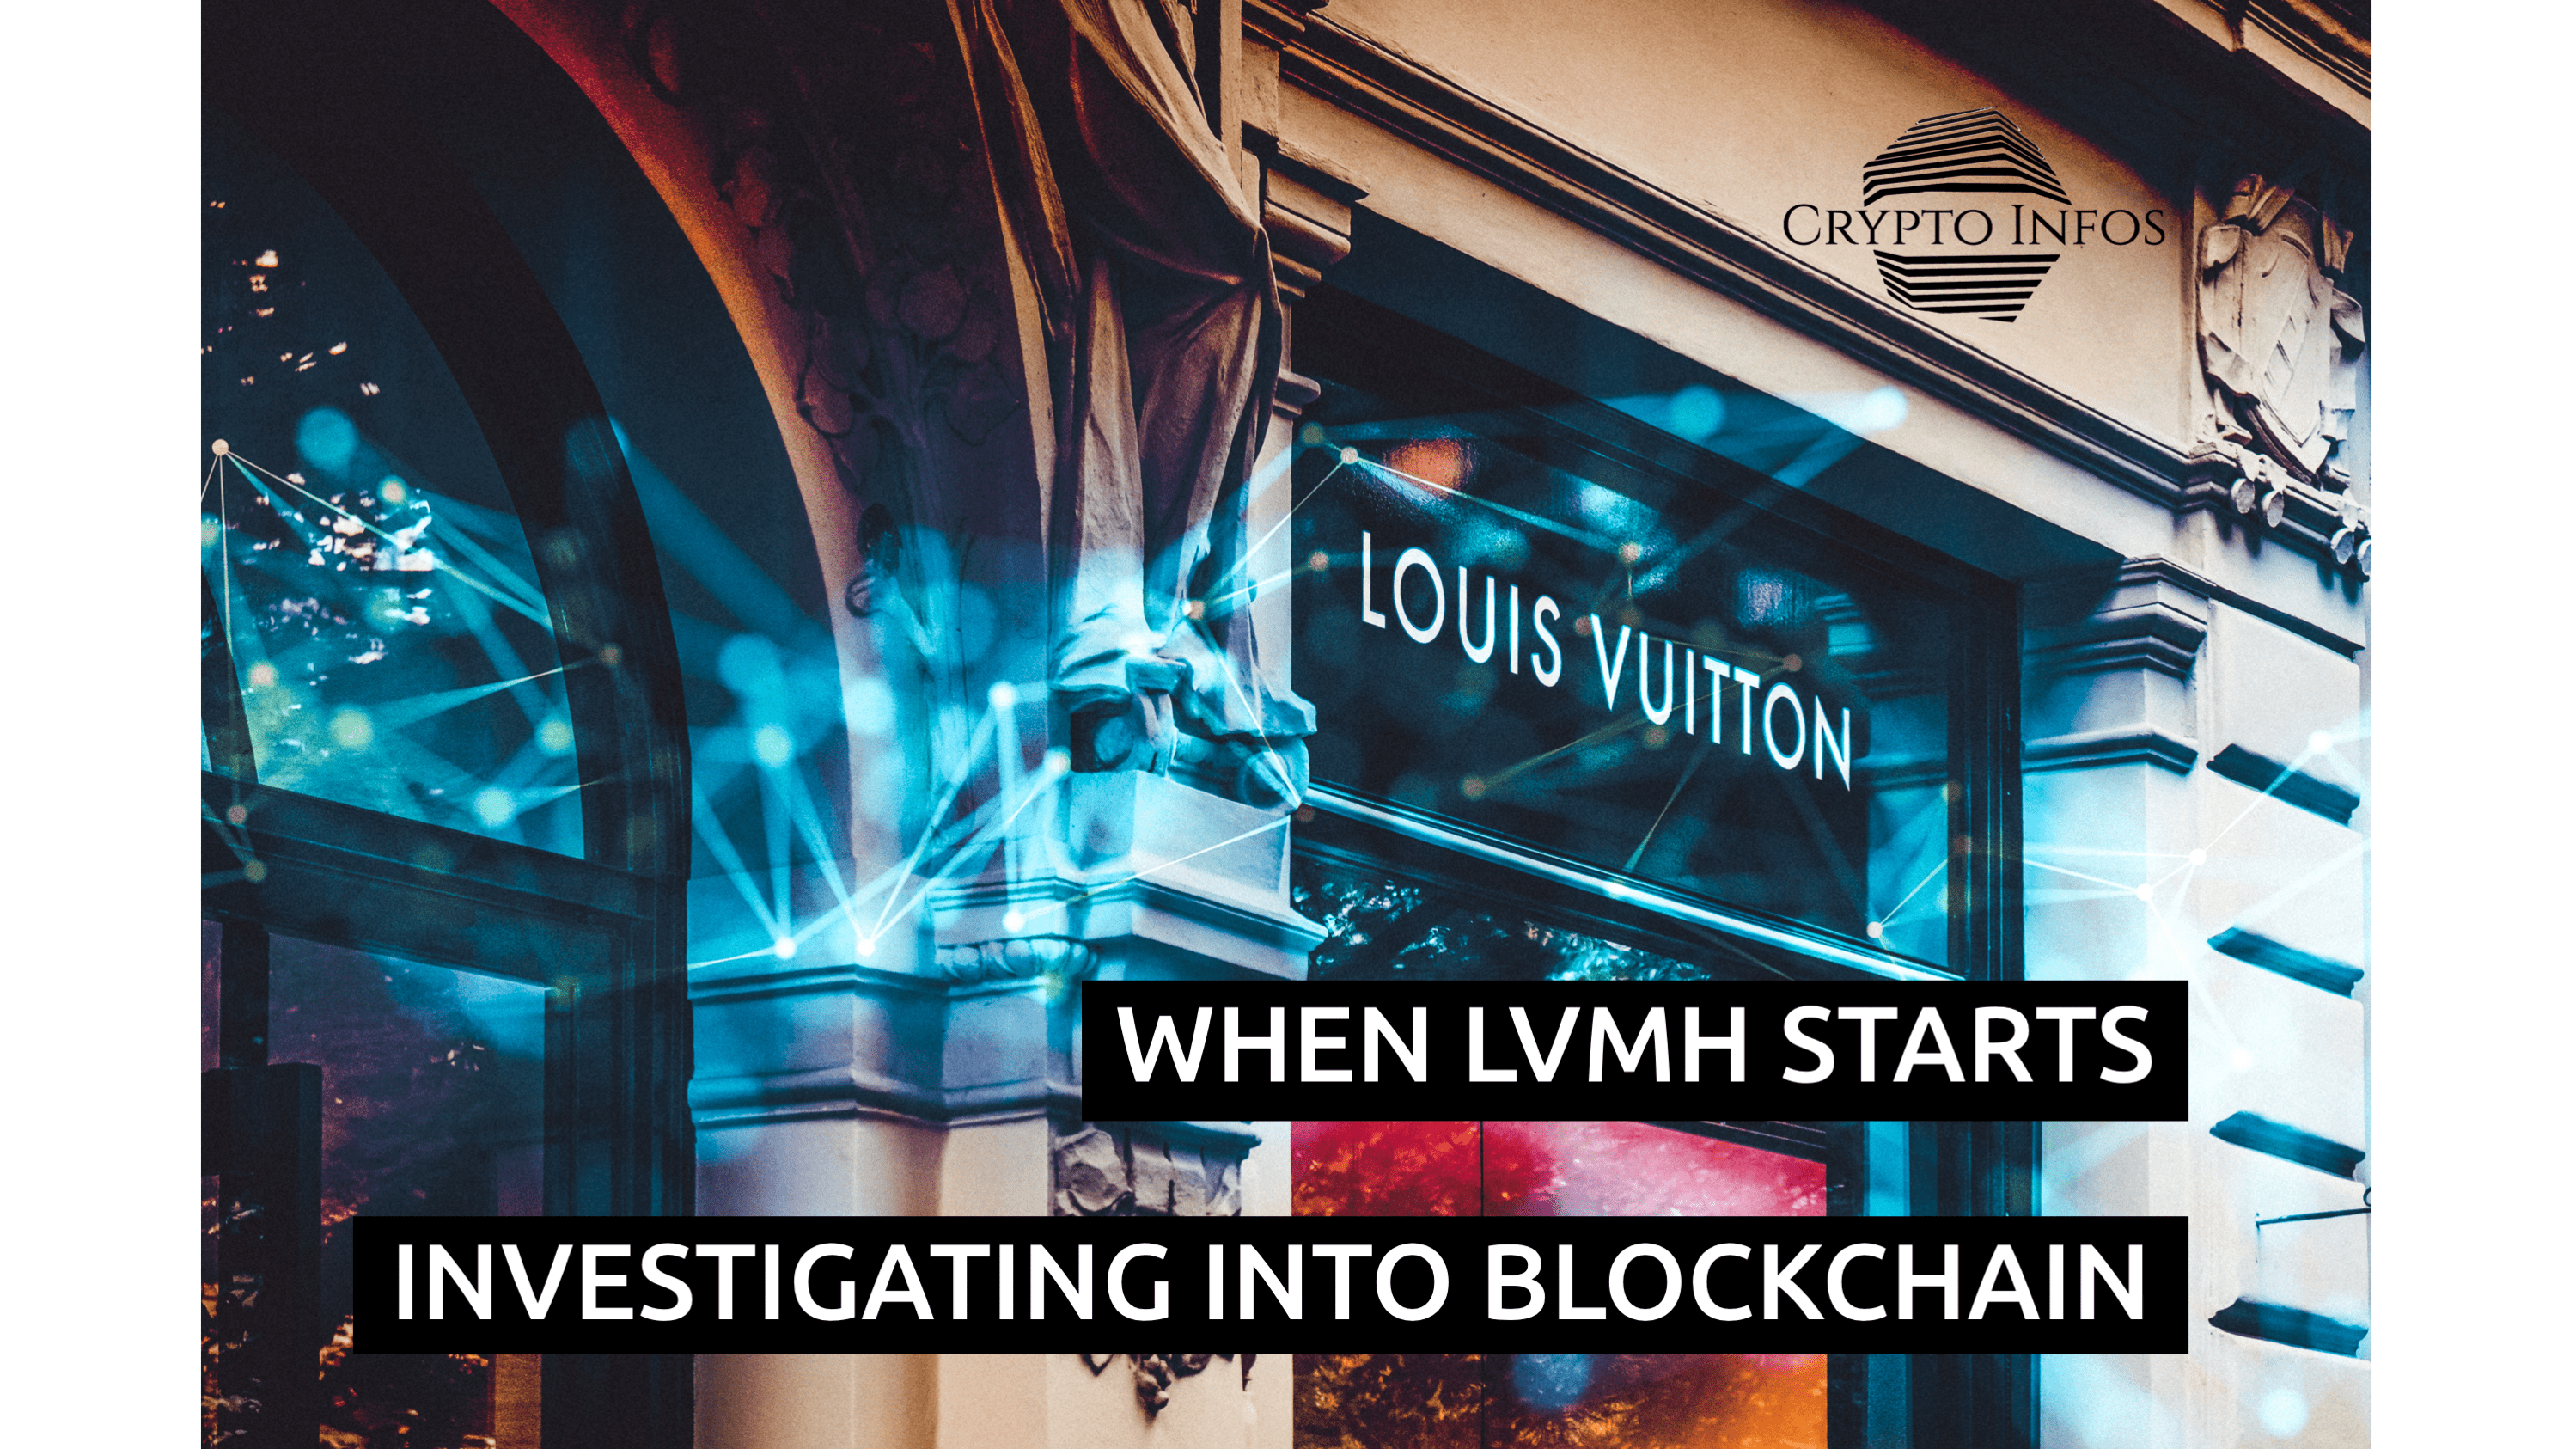 Louis Vuitton Owner LVMH To Use Blockchain To Track Luxury Goods